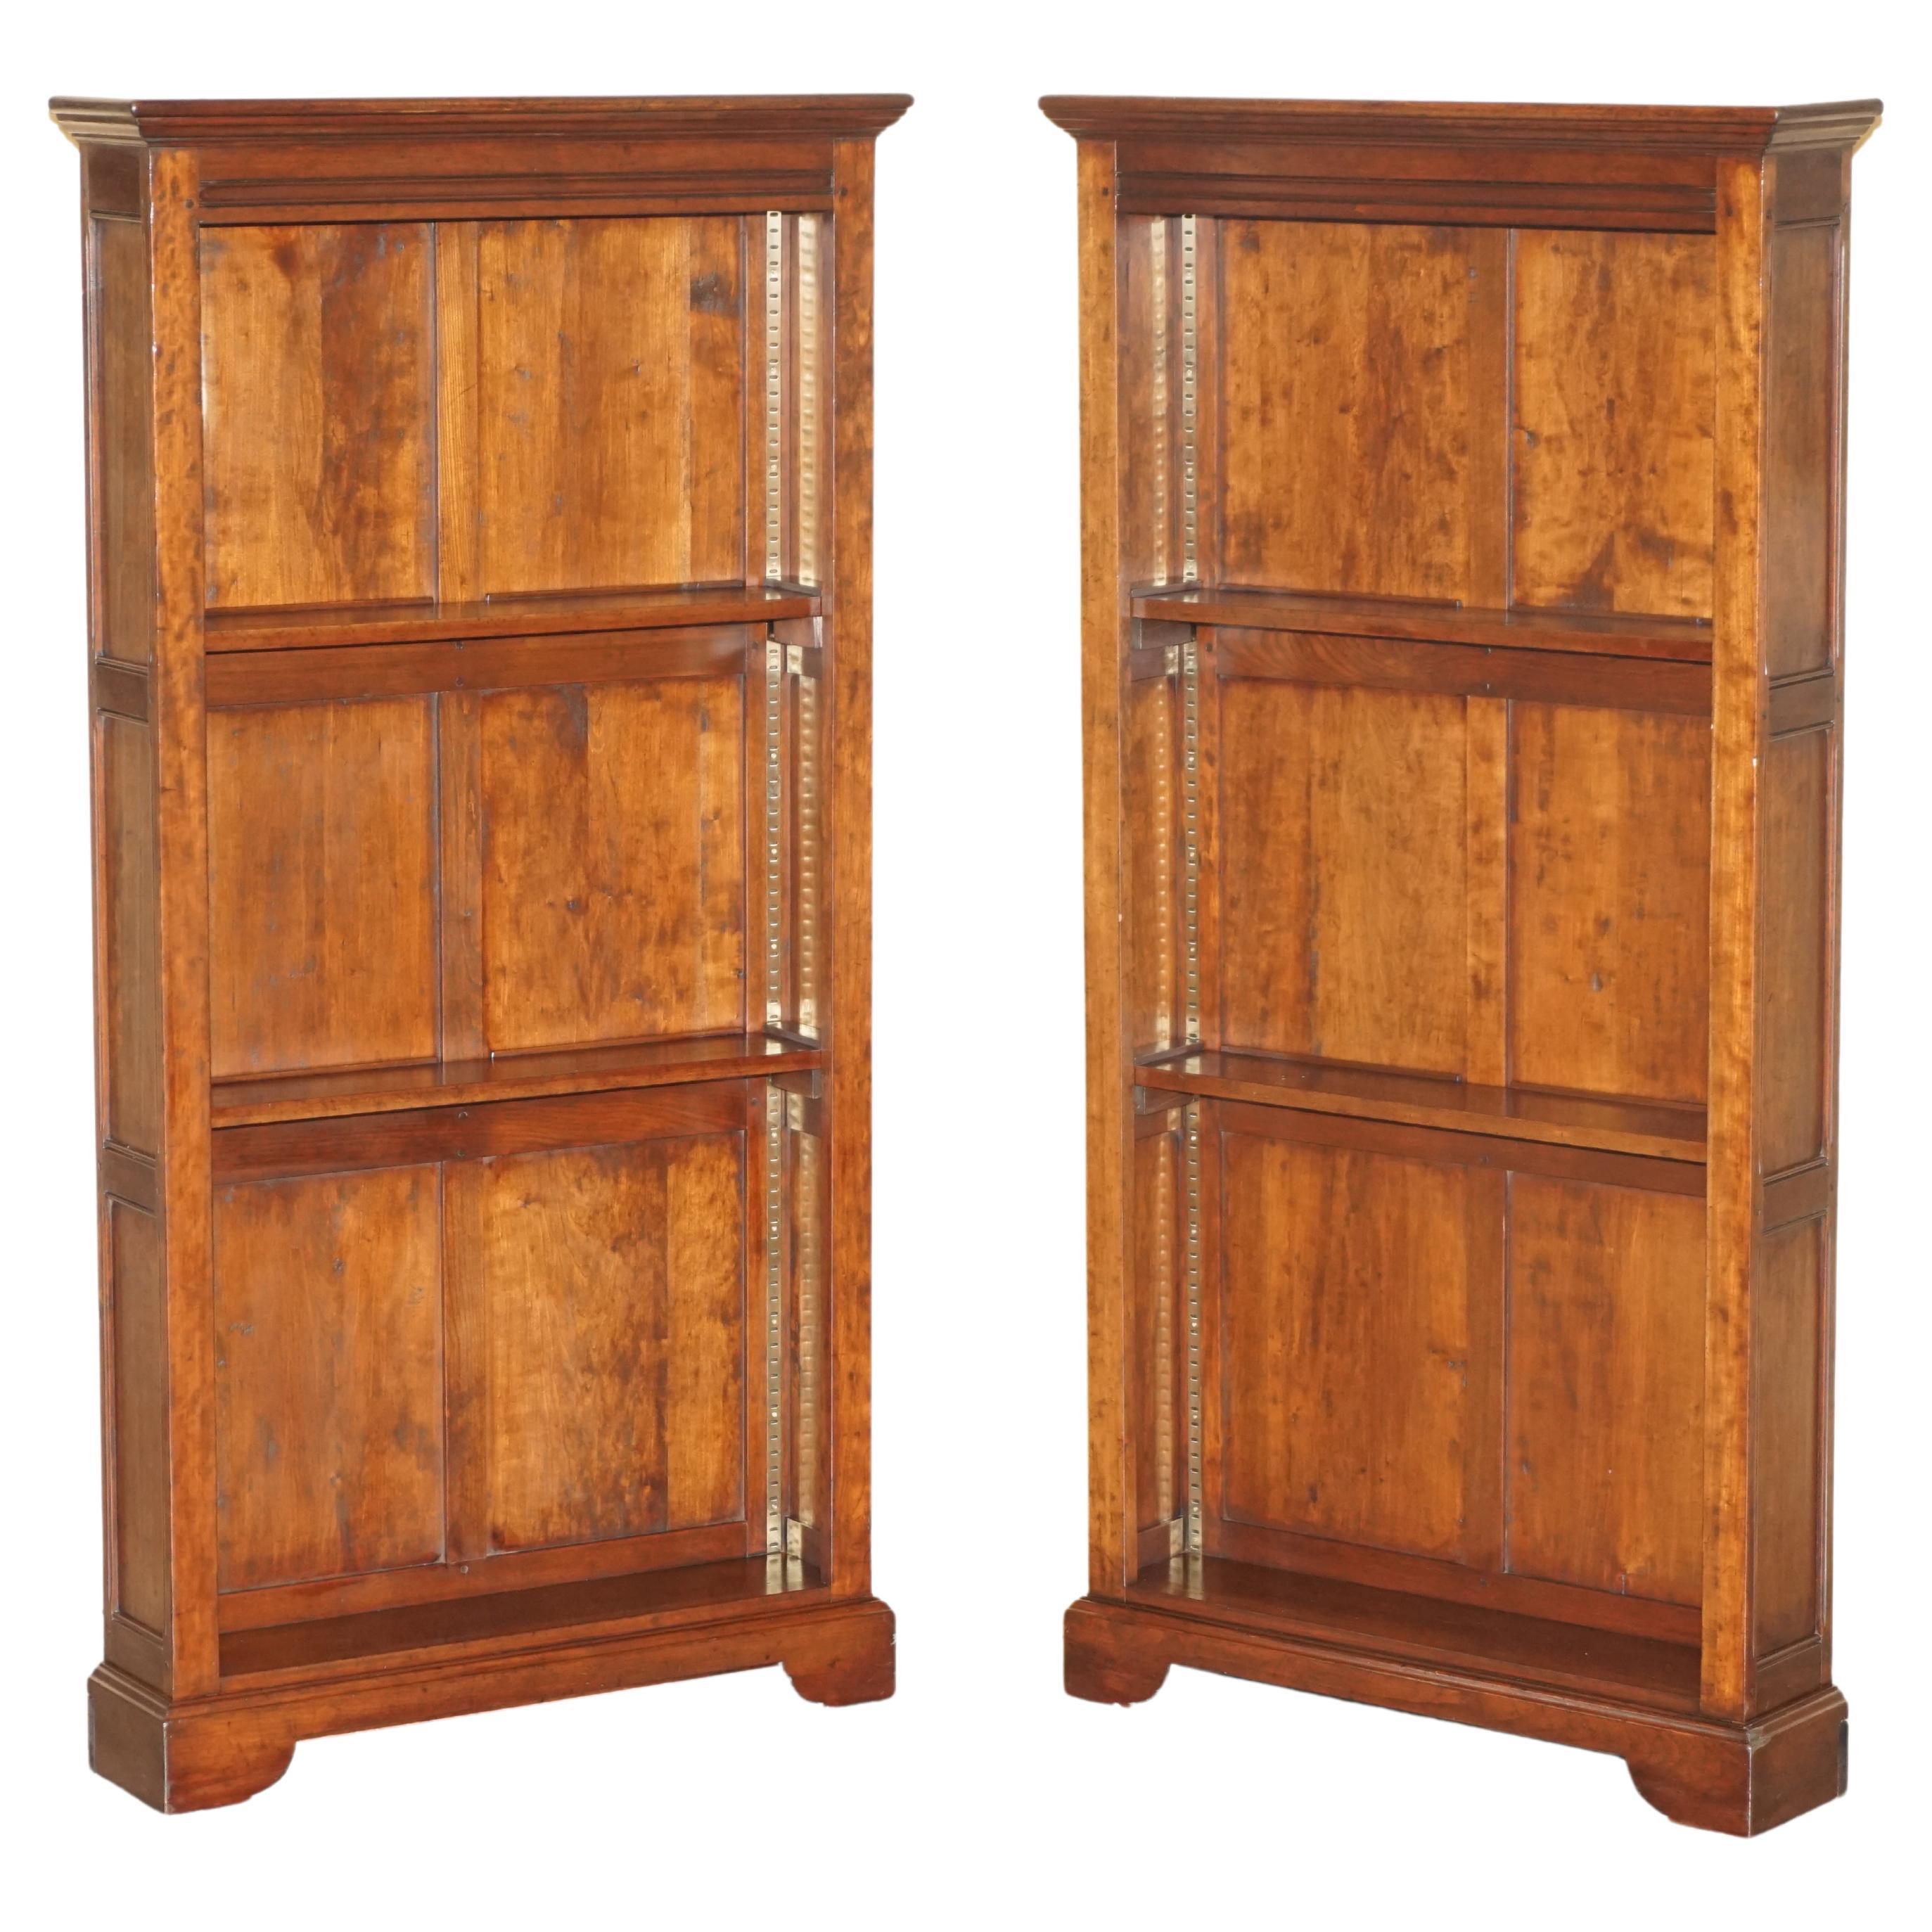 PAIR OF OPEN LIBRARY HARDWOOD BOOKCASES PANELLED SiDES HEIGHT ADJUSTABLE SHELVES